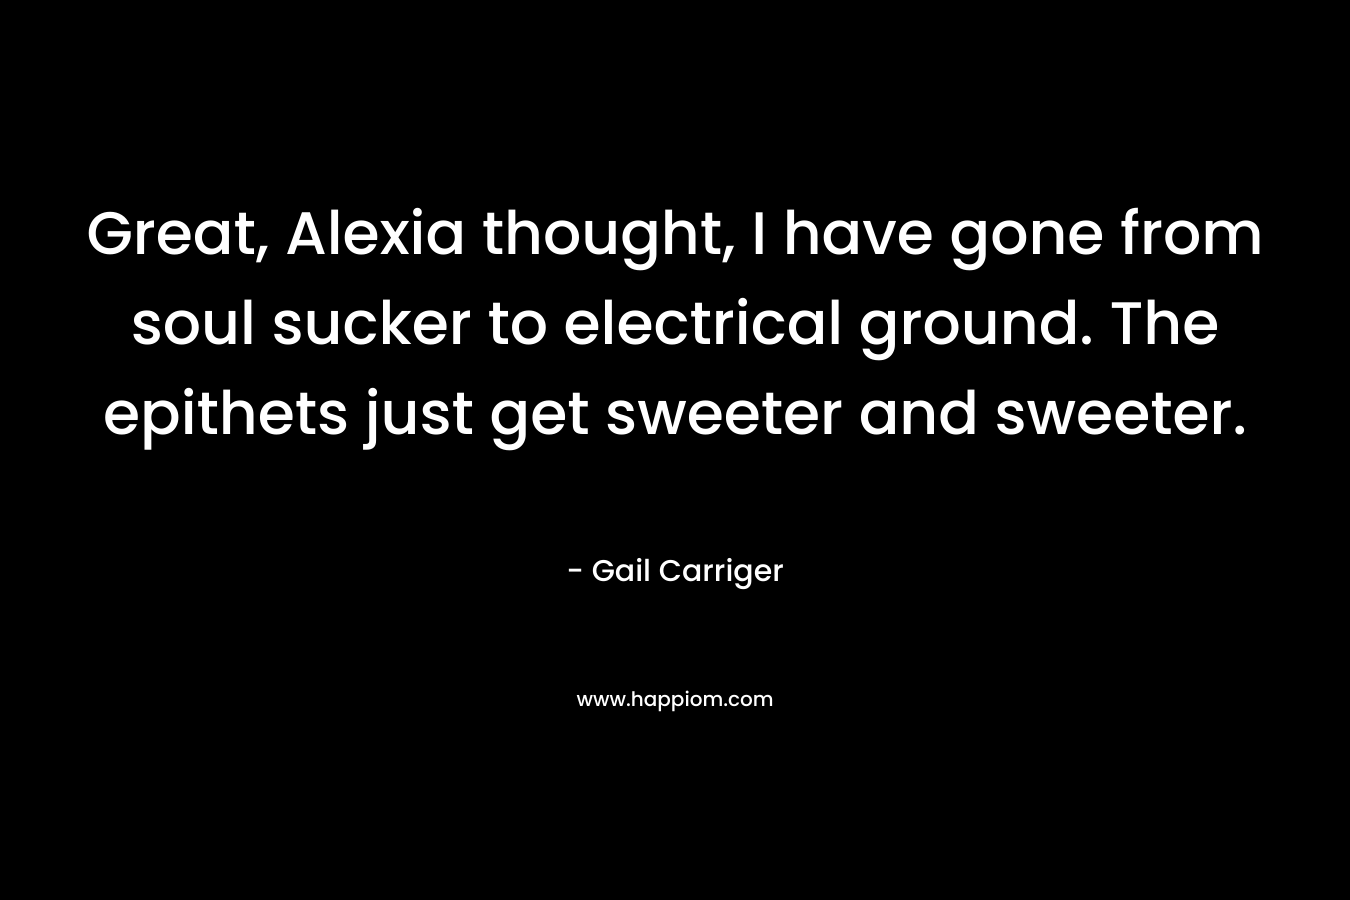 Great, Alexia thought, I have gone from soul sucker to electrical ground. The epithets just get sweeter and sweeter.